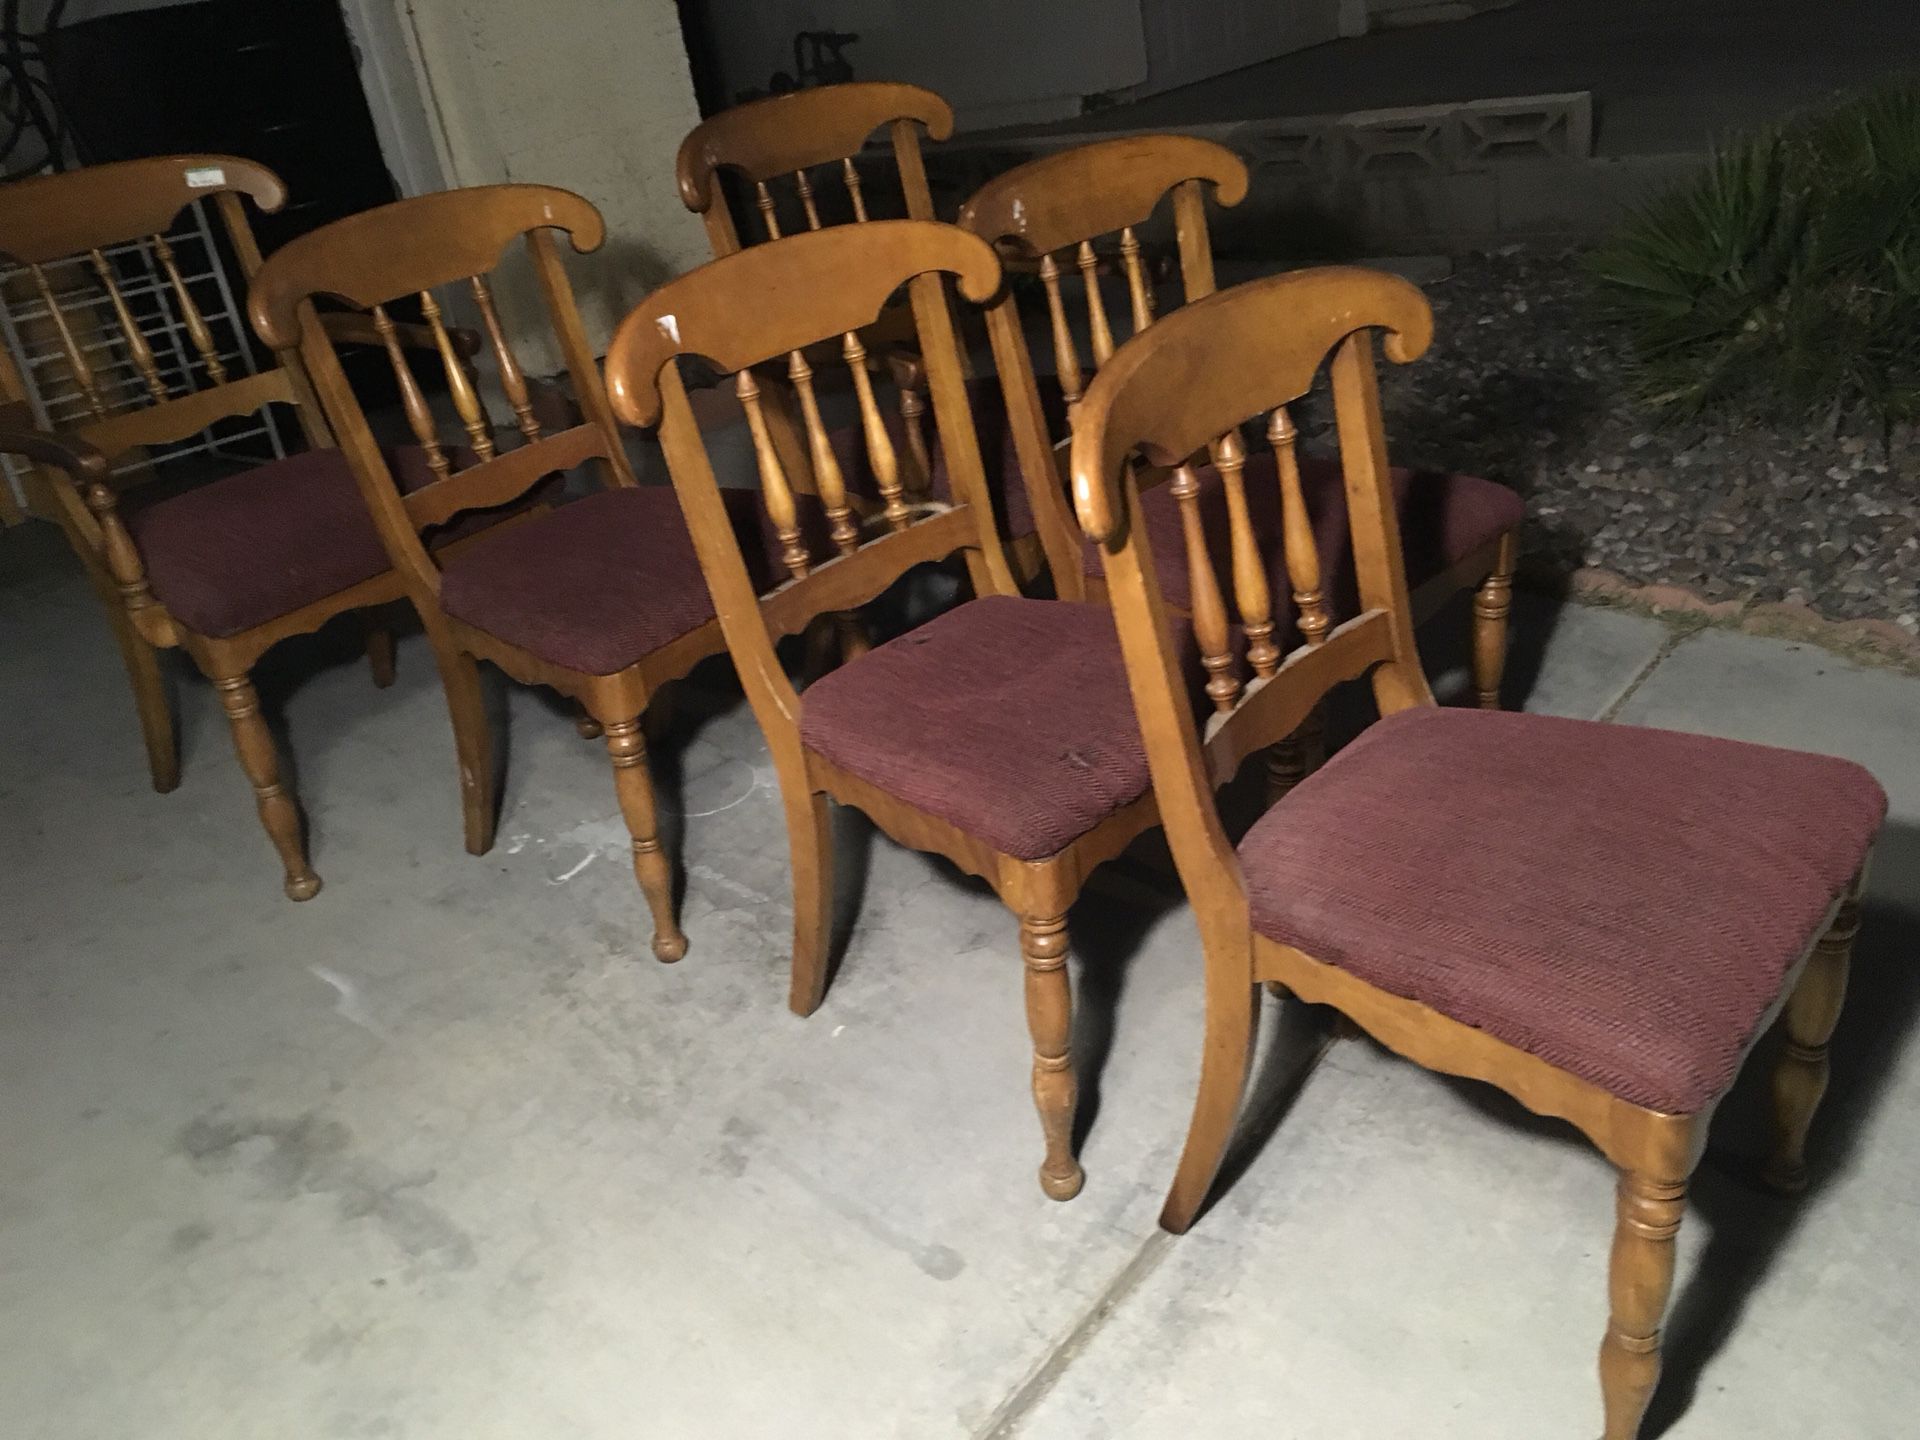 6 wooden Chairs